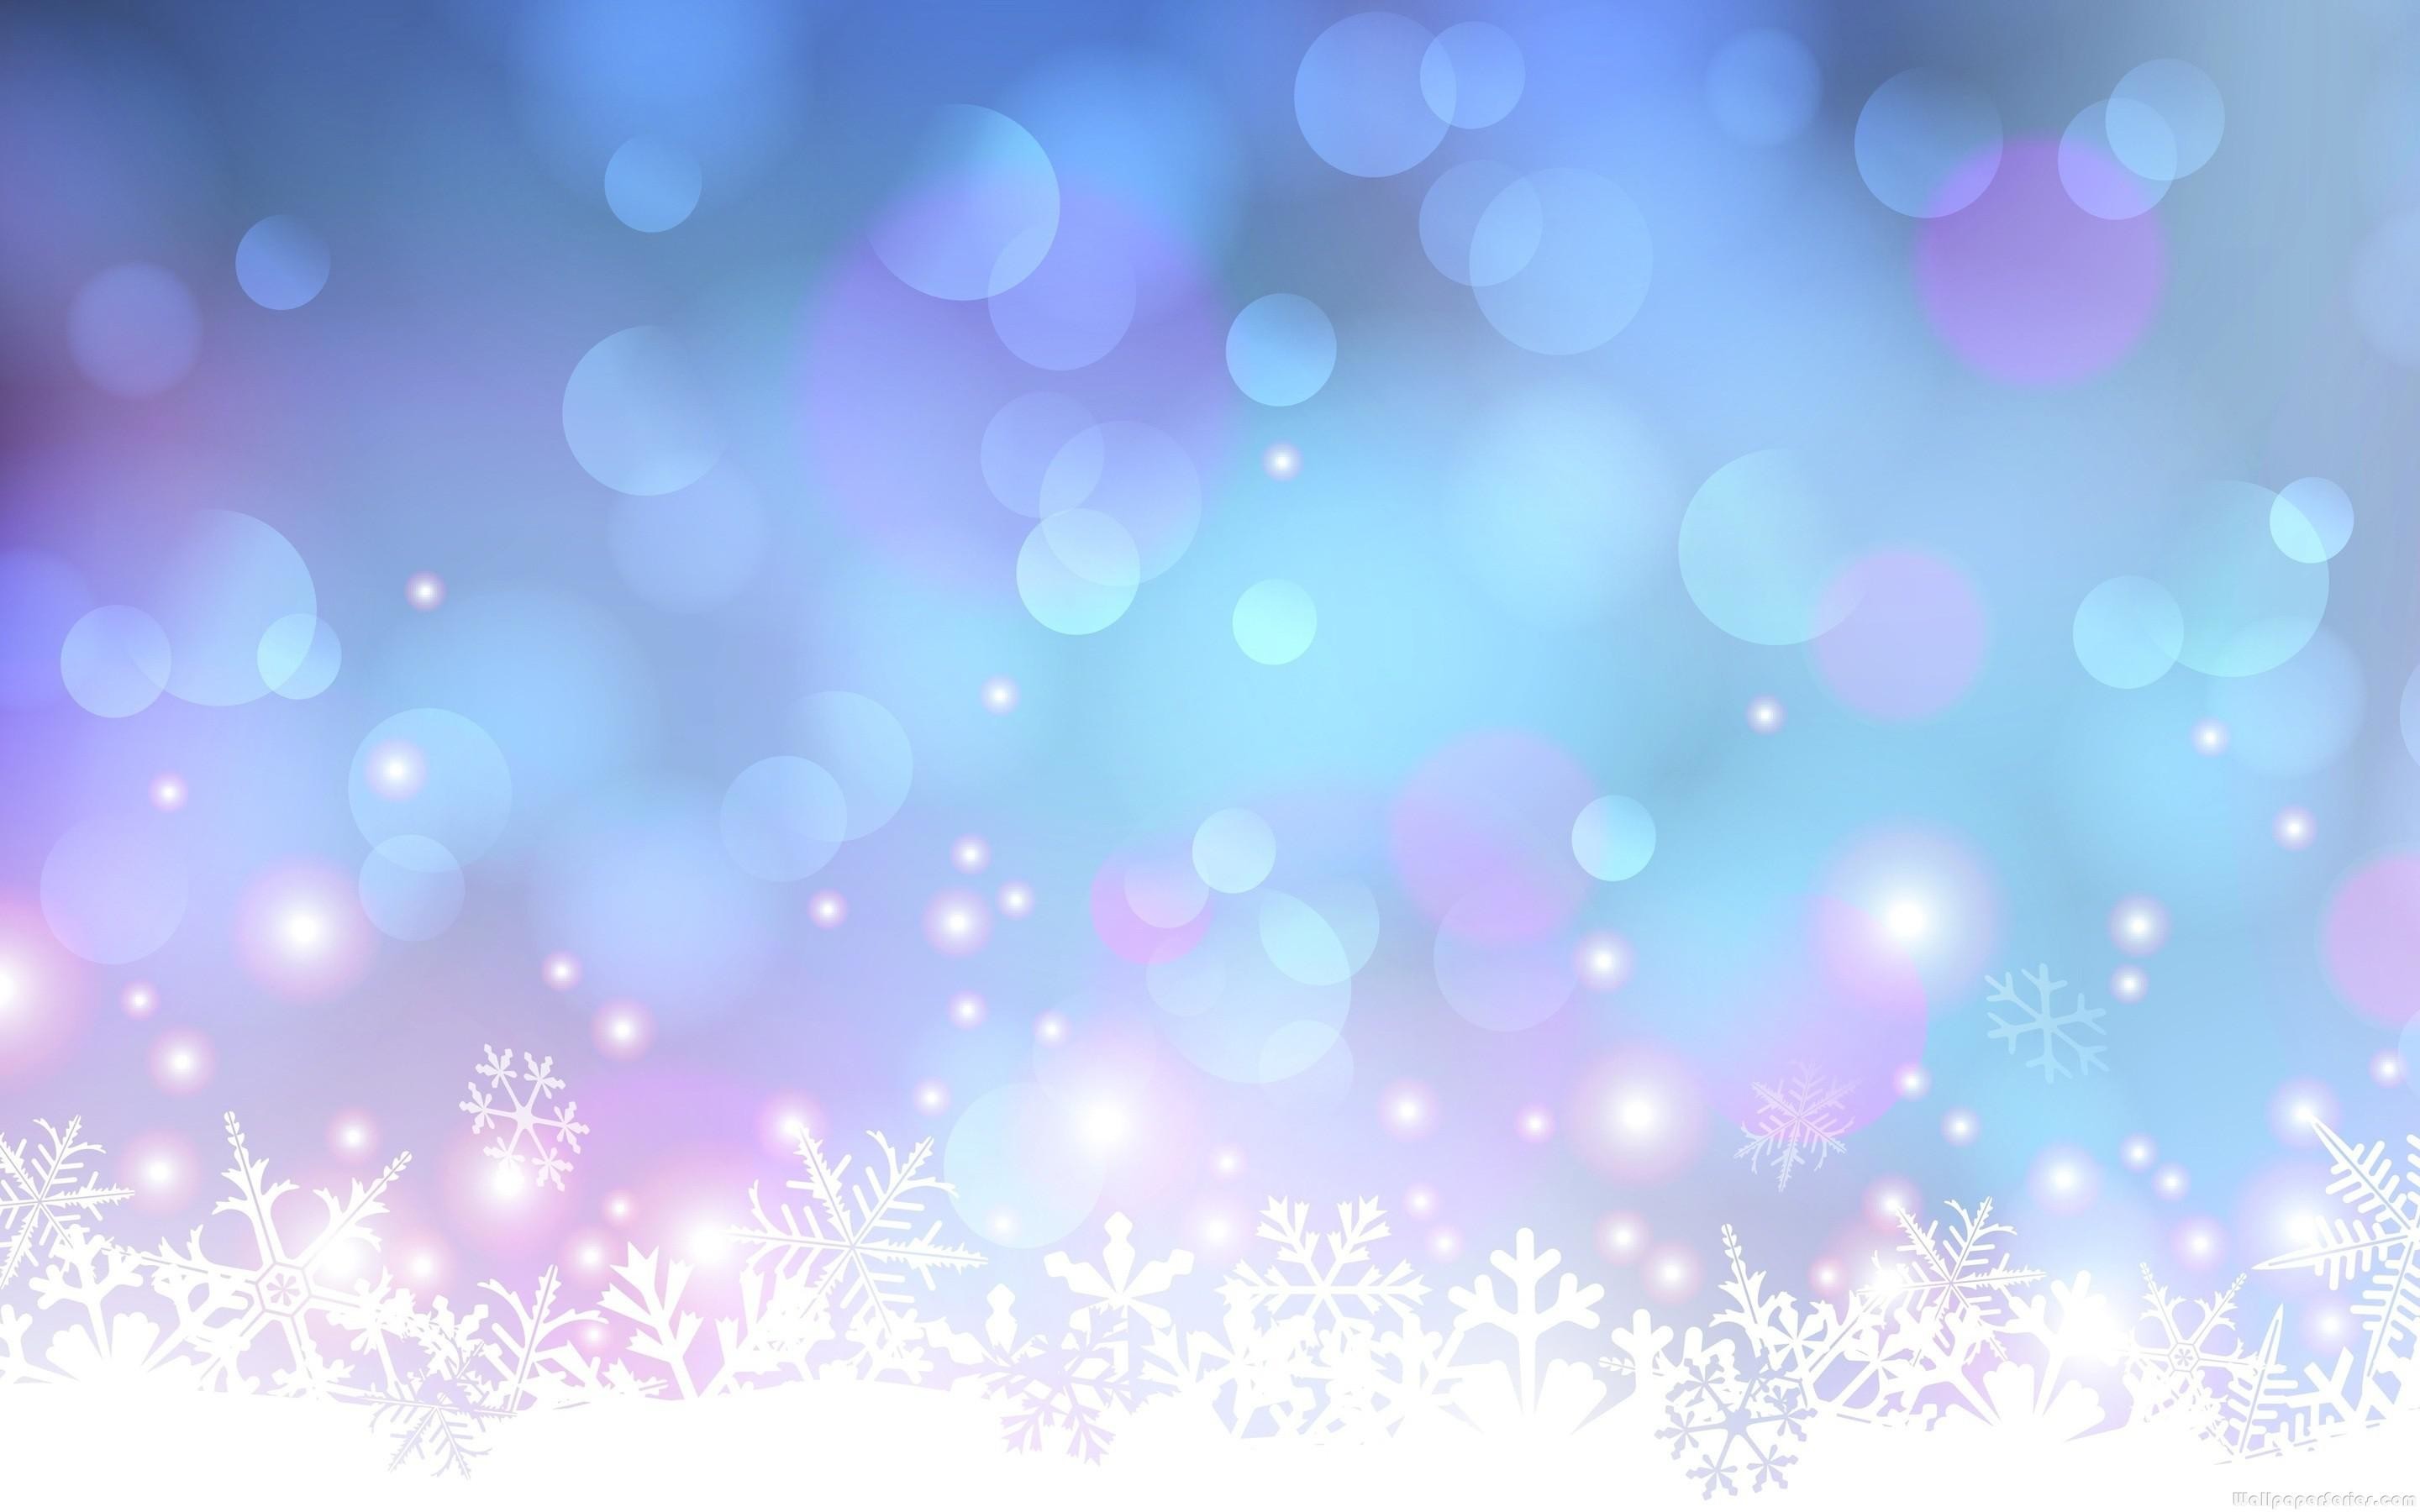 2880x1800 ... WallpapersÂ» merry christmas images - Yahoo Image Search Results |  CHRISTMAS .